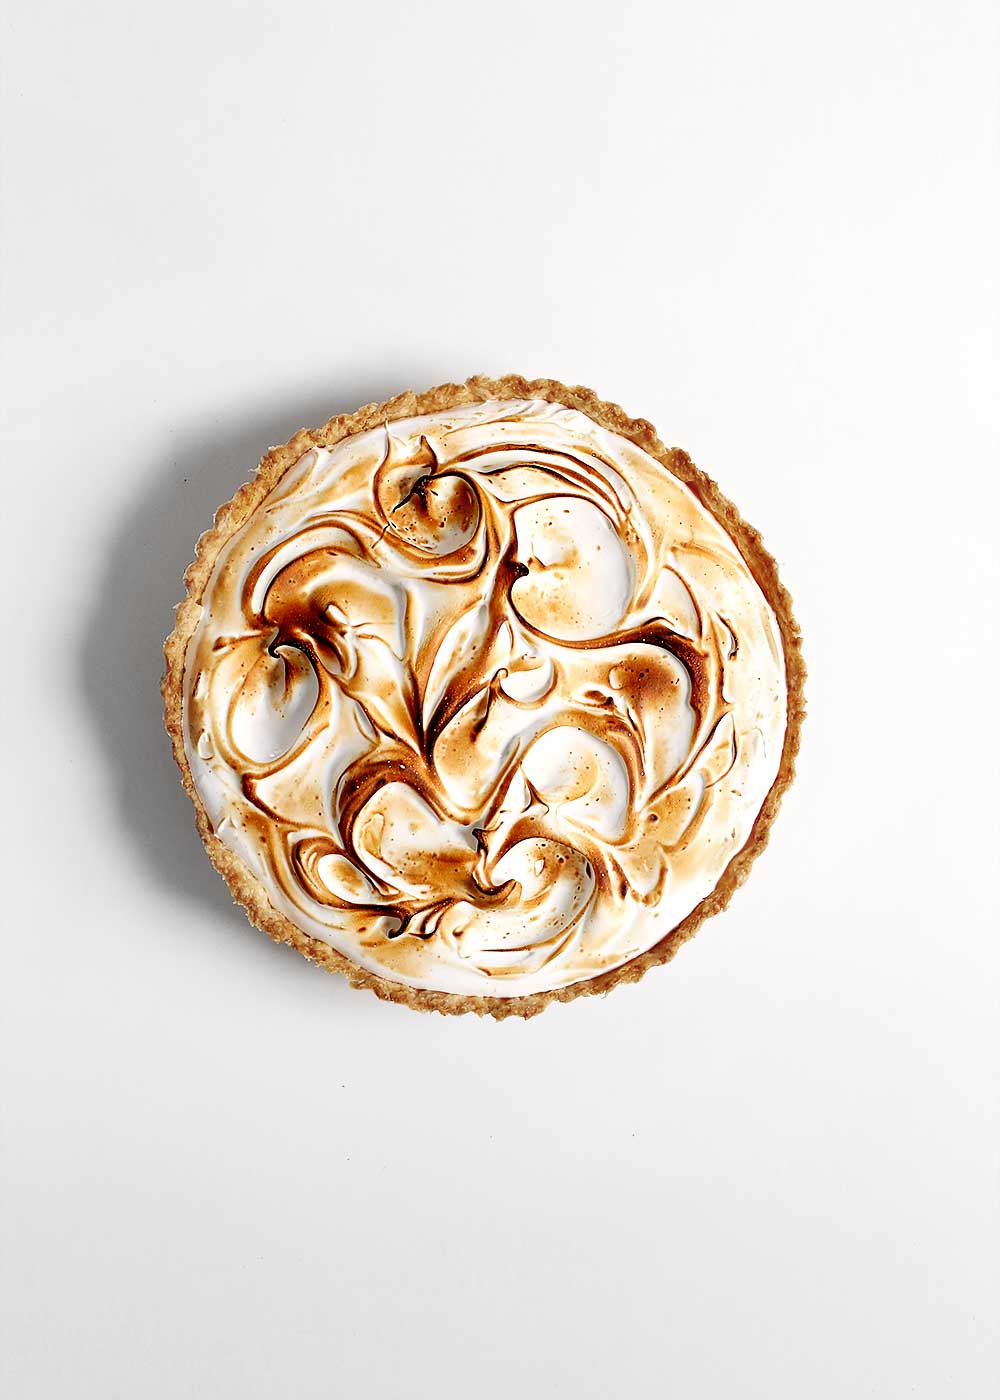 Lemon Meringue Pie made with an easy 7 minute meringue by The Fauxmartha